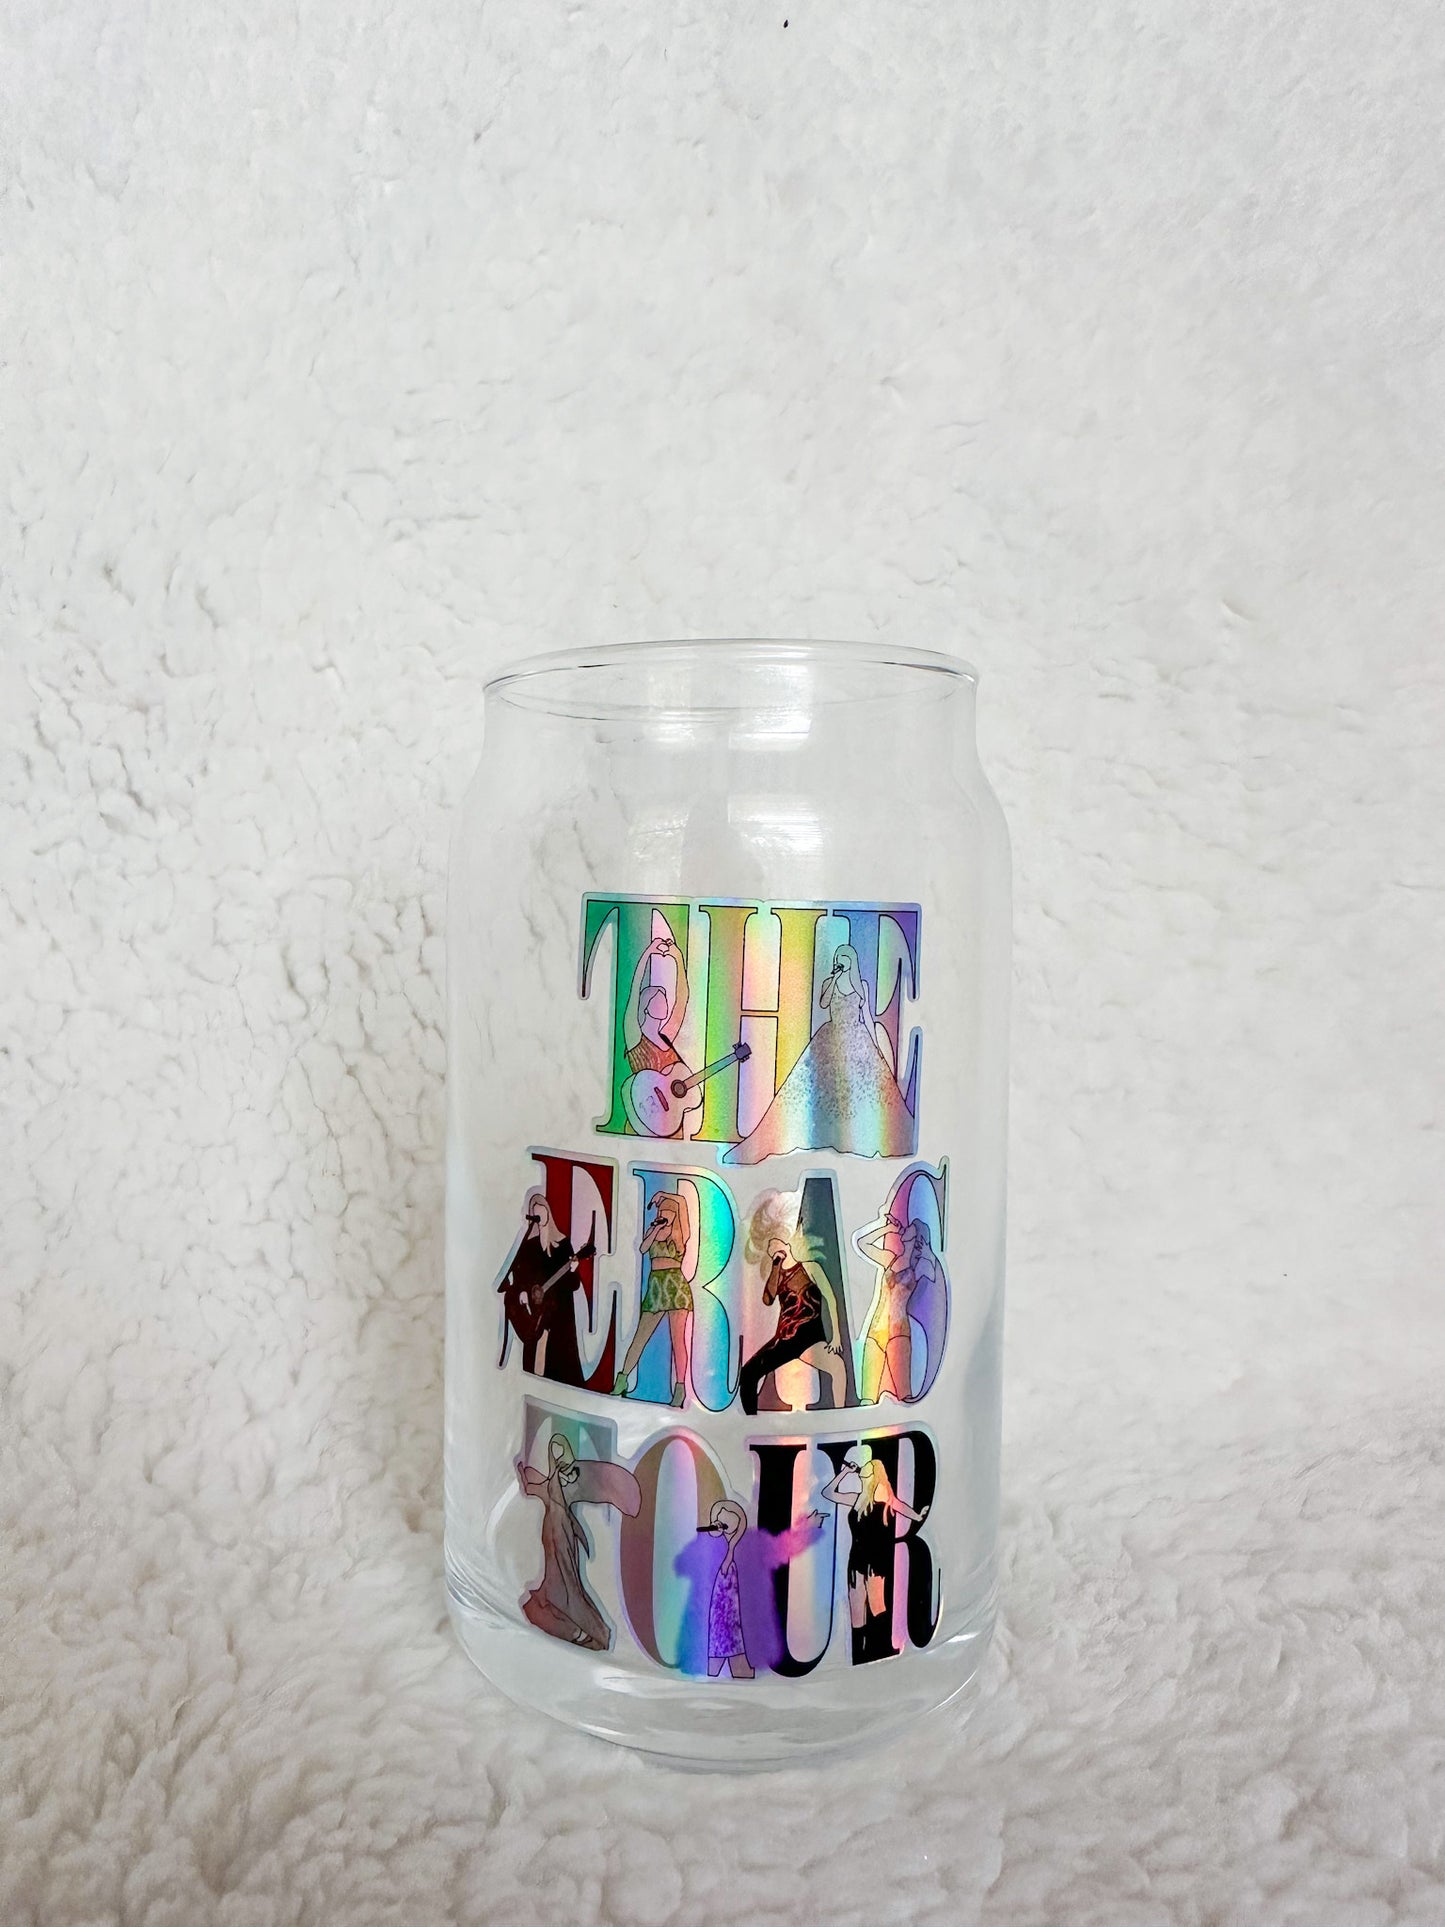 T-Swift the eras tour holographic glass cup.